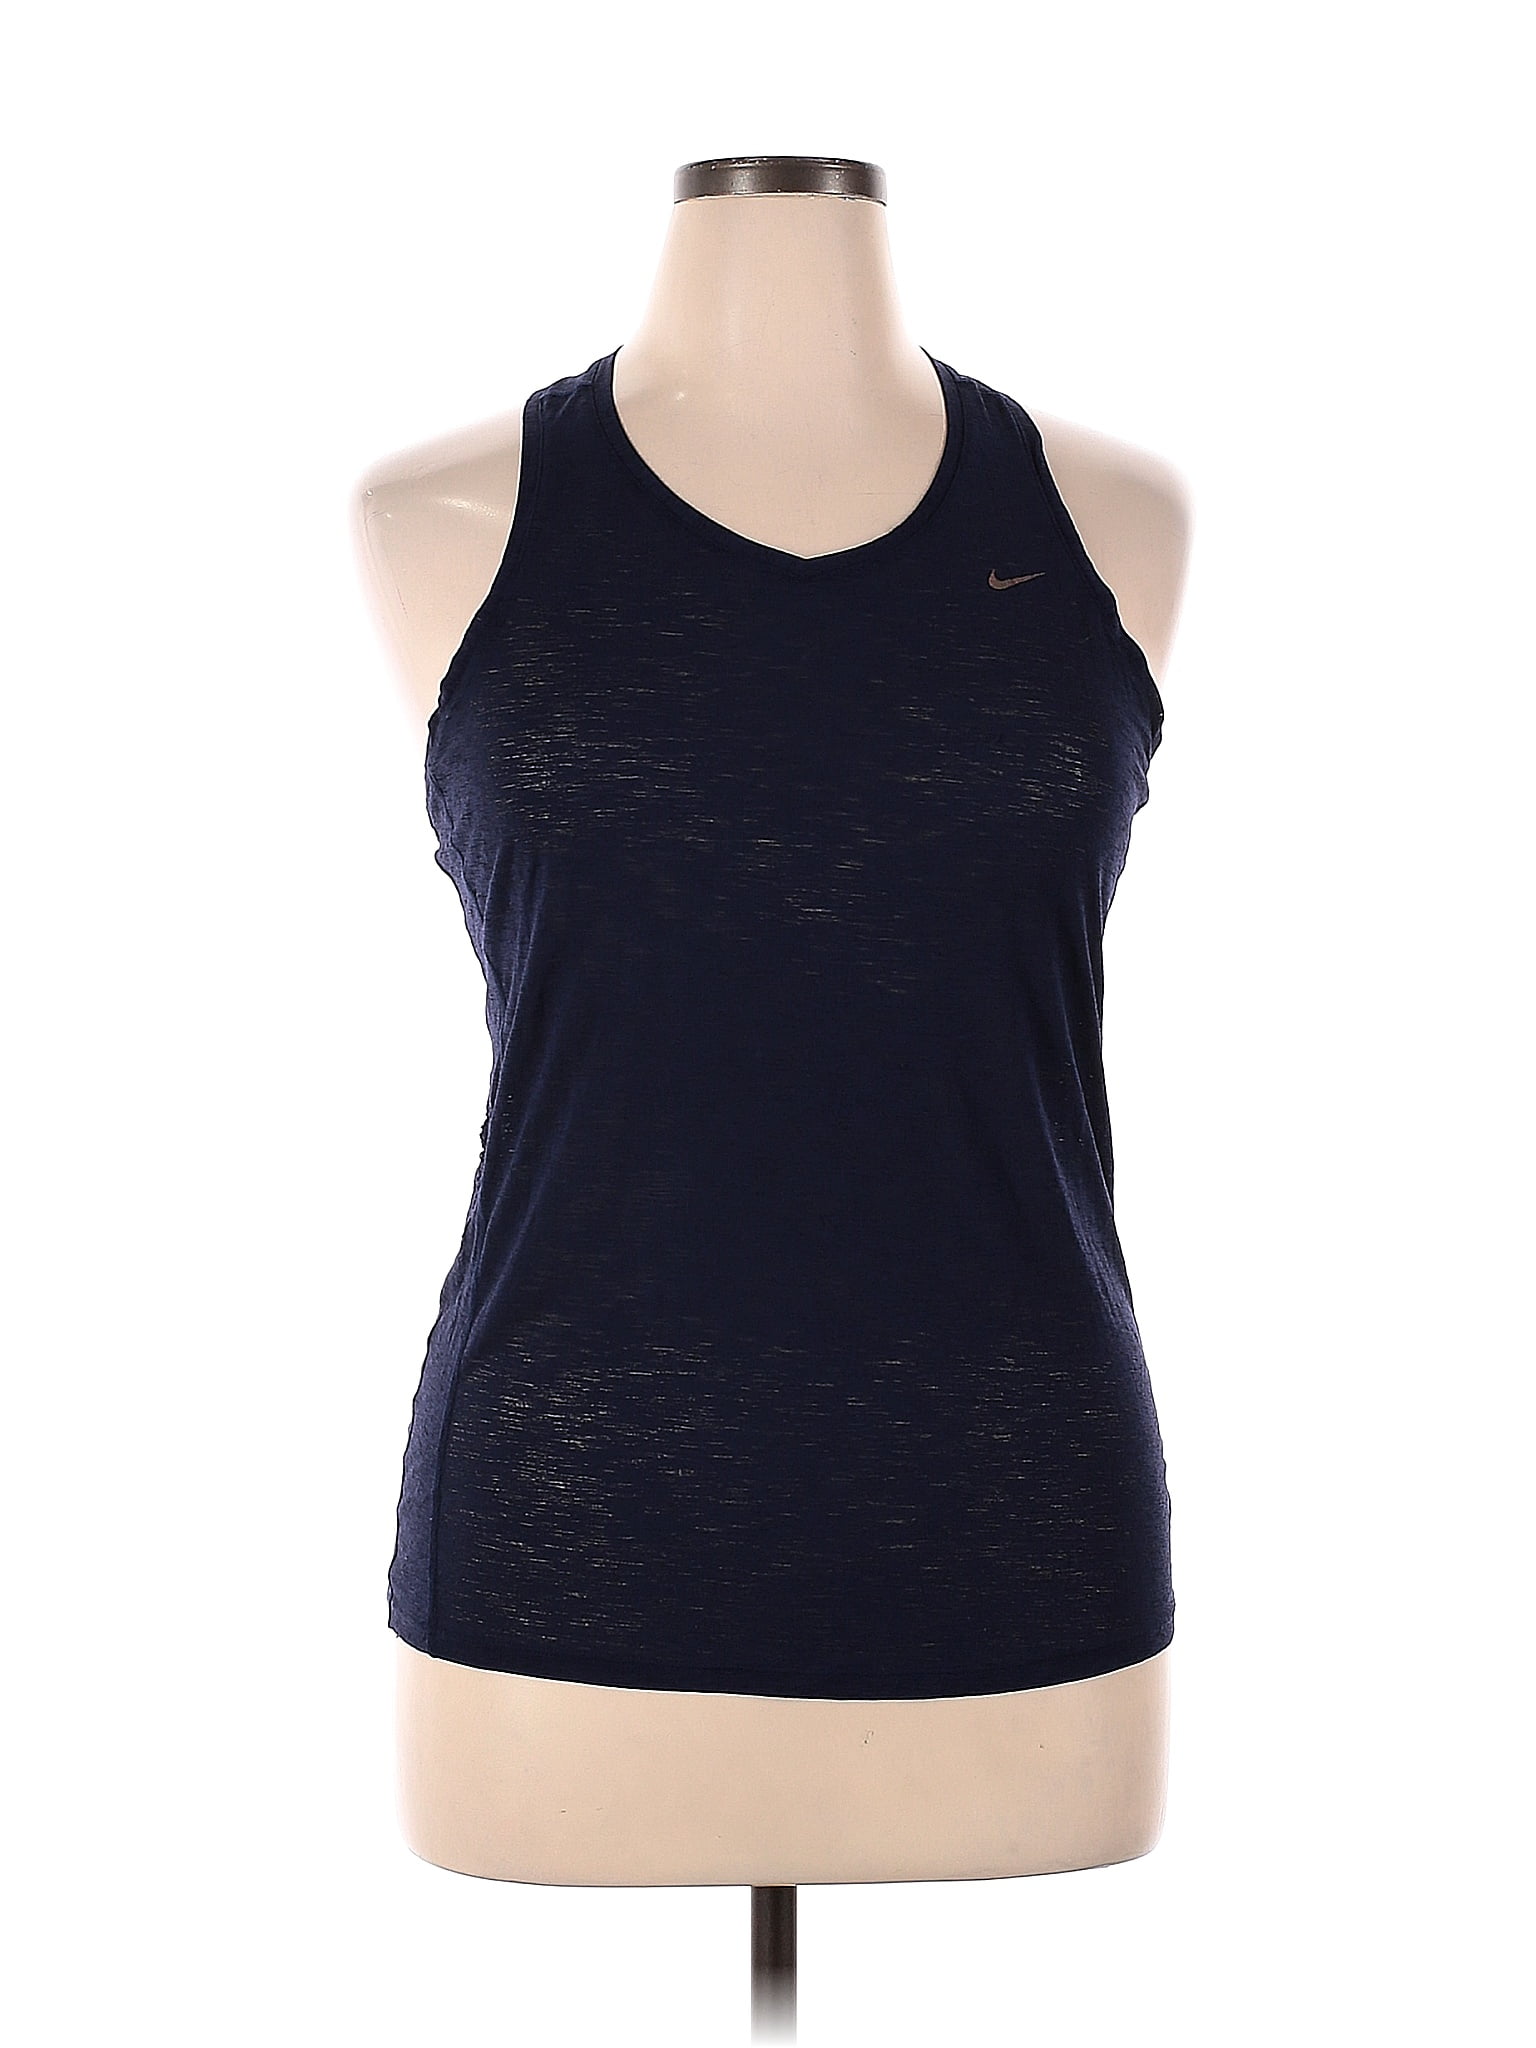 Nike Blue Active Tank Size XL - 52% off